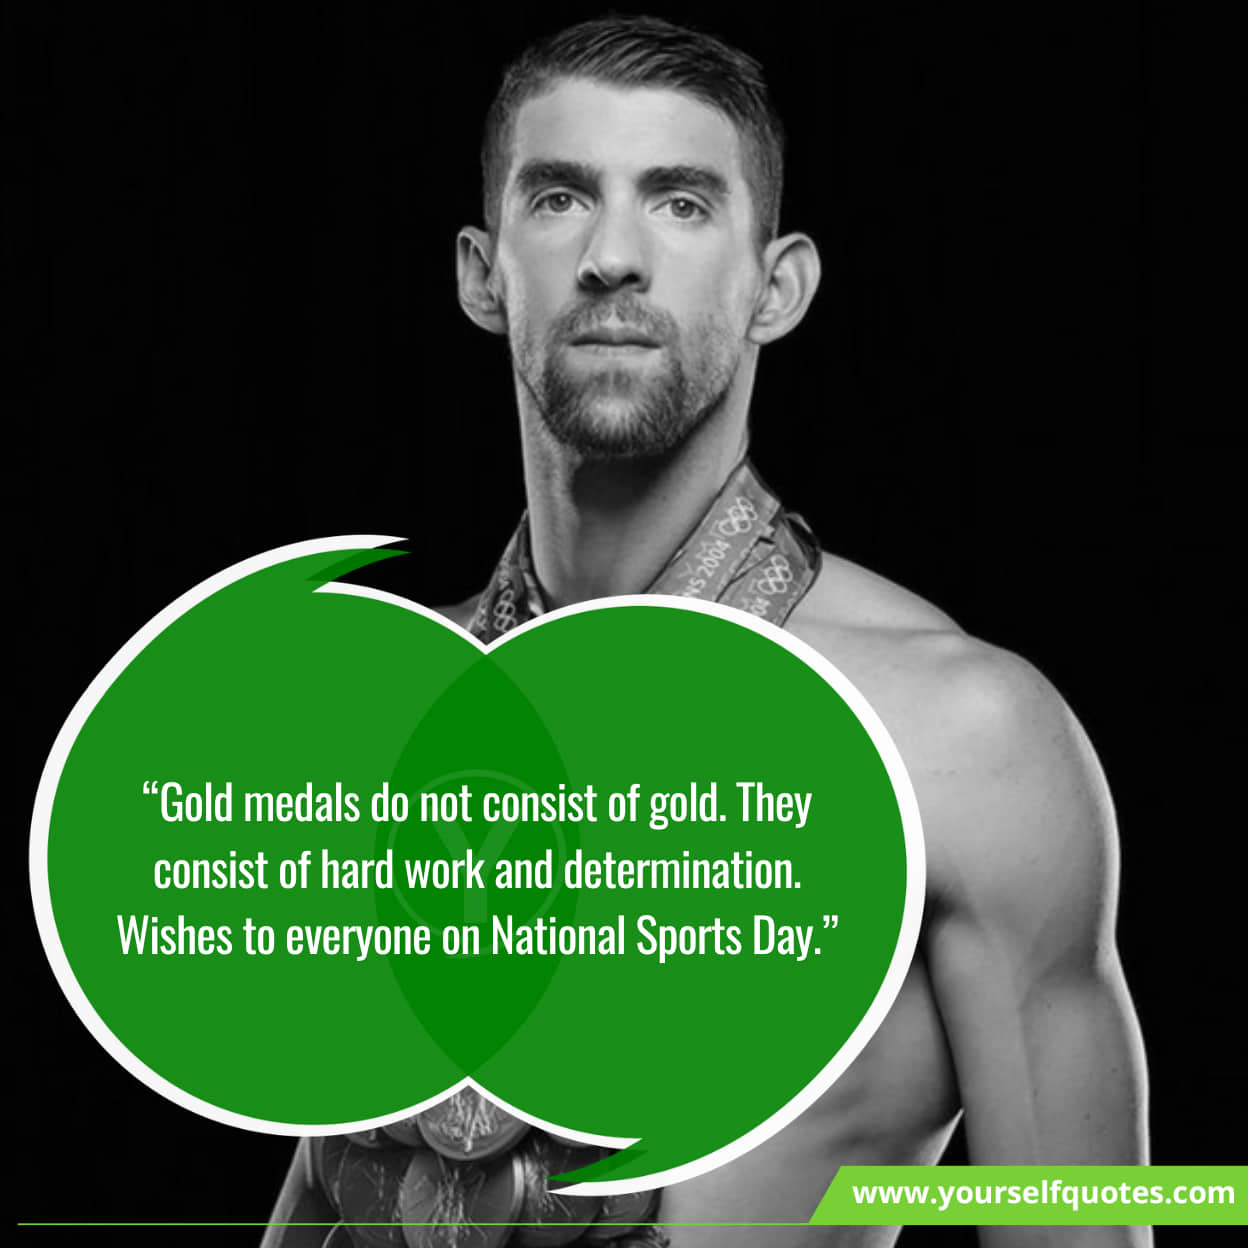 Inspirational Best Famous Quotes For National Sports Day